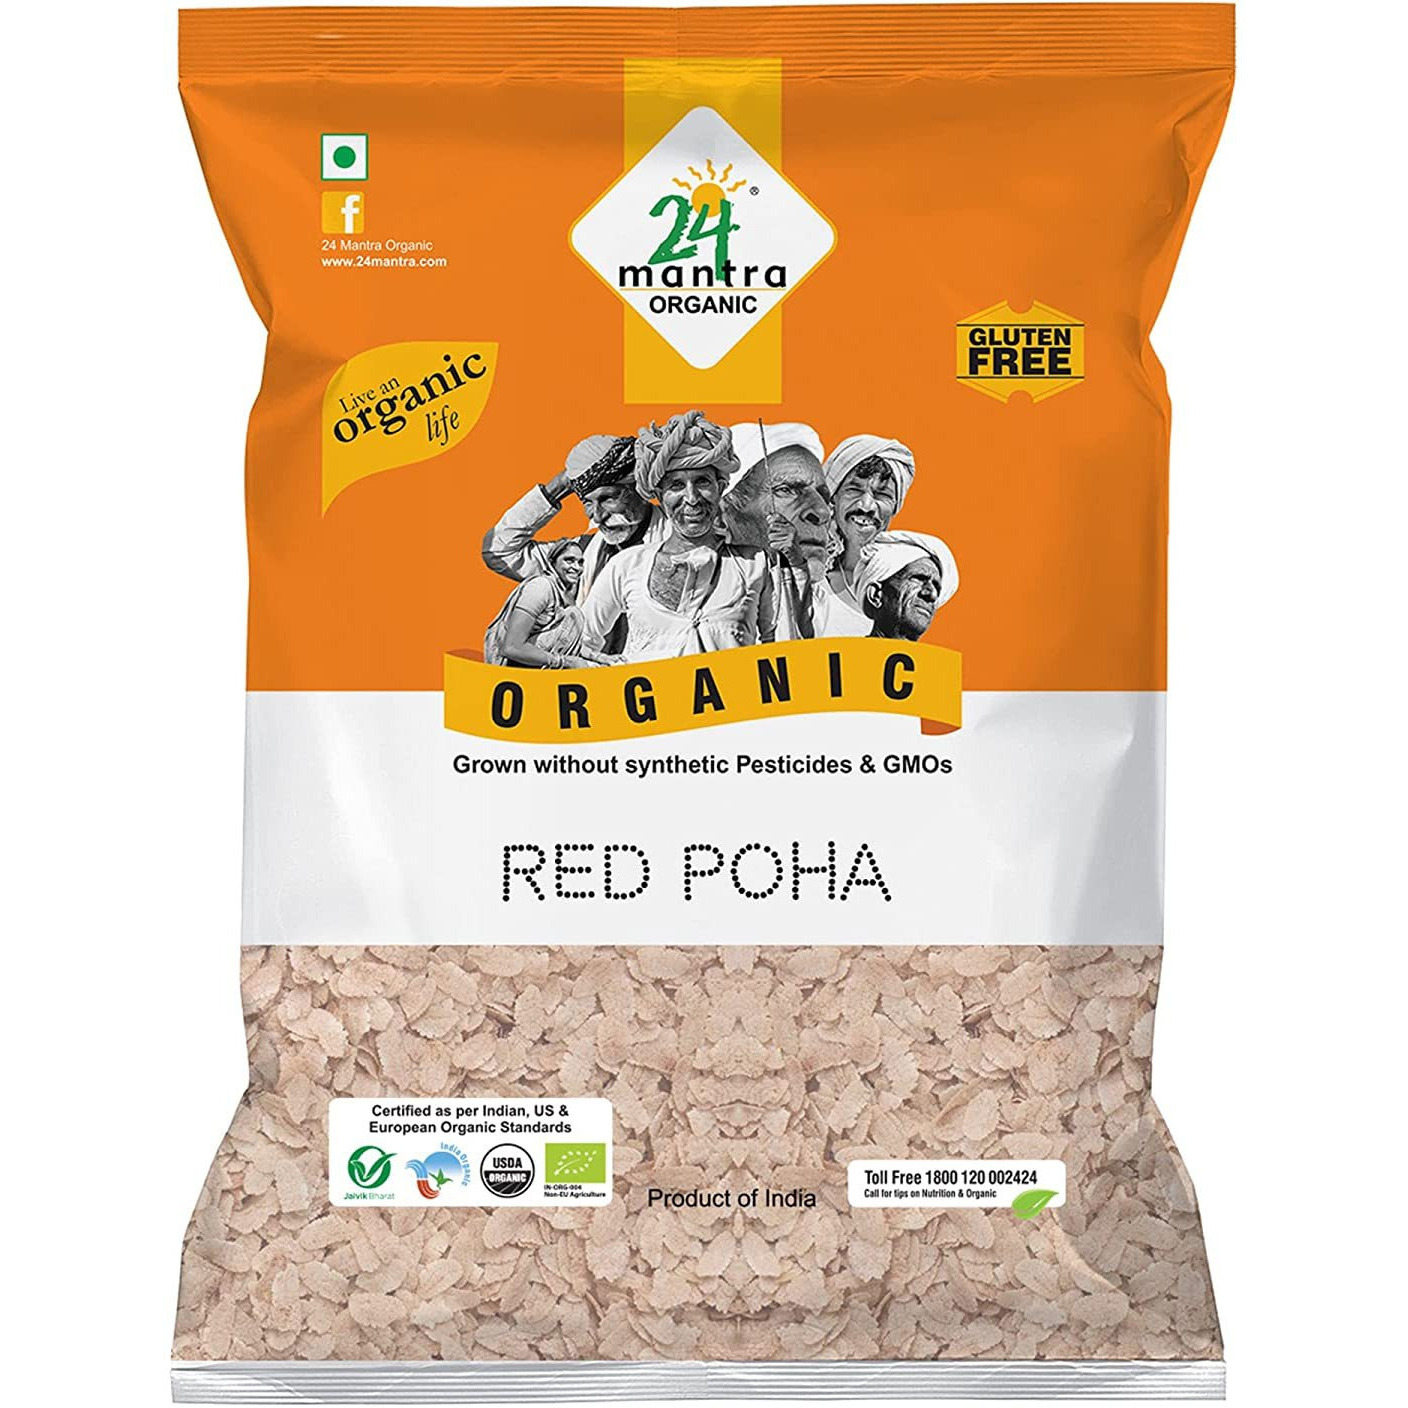 Pack of 3 - 24 Mantra Organic Red Poha - 2 Lb (908 Gm)